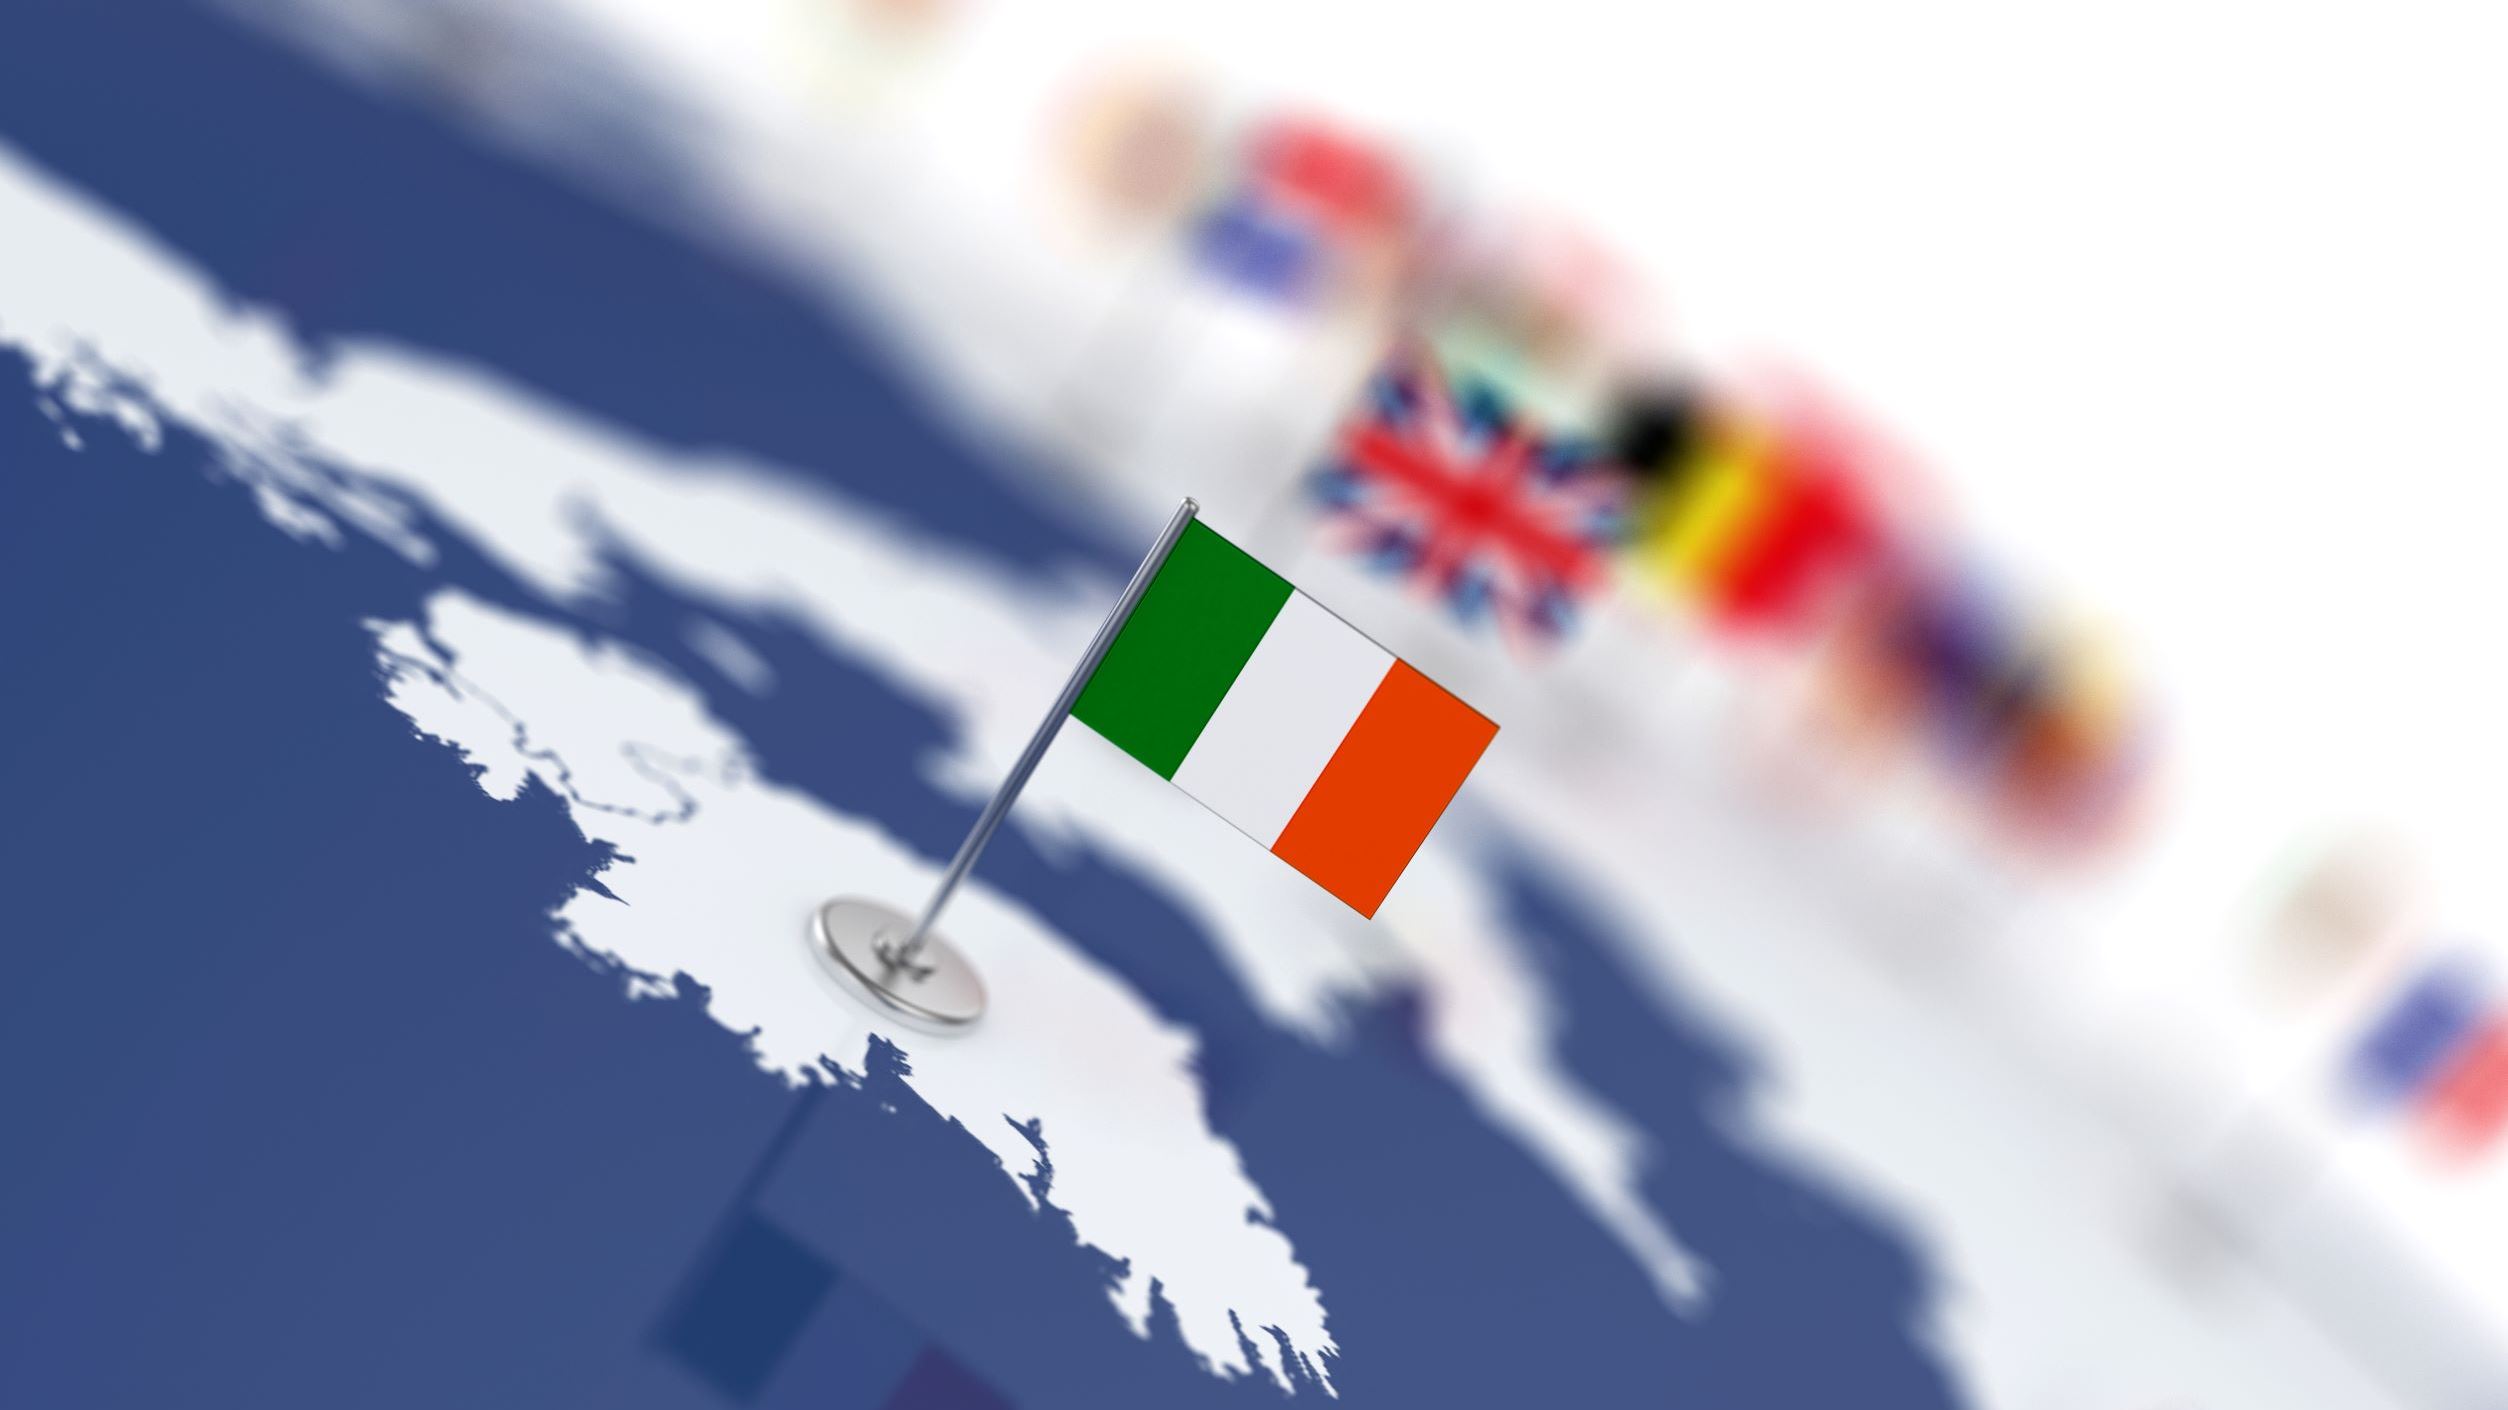 Image showing a map and the Irish flag